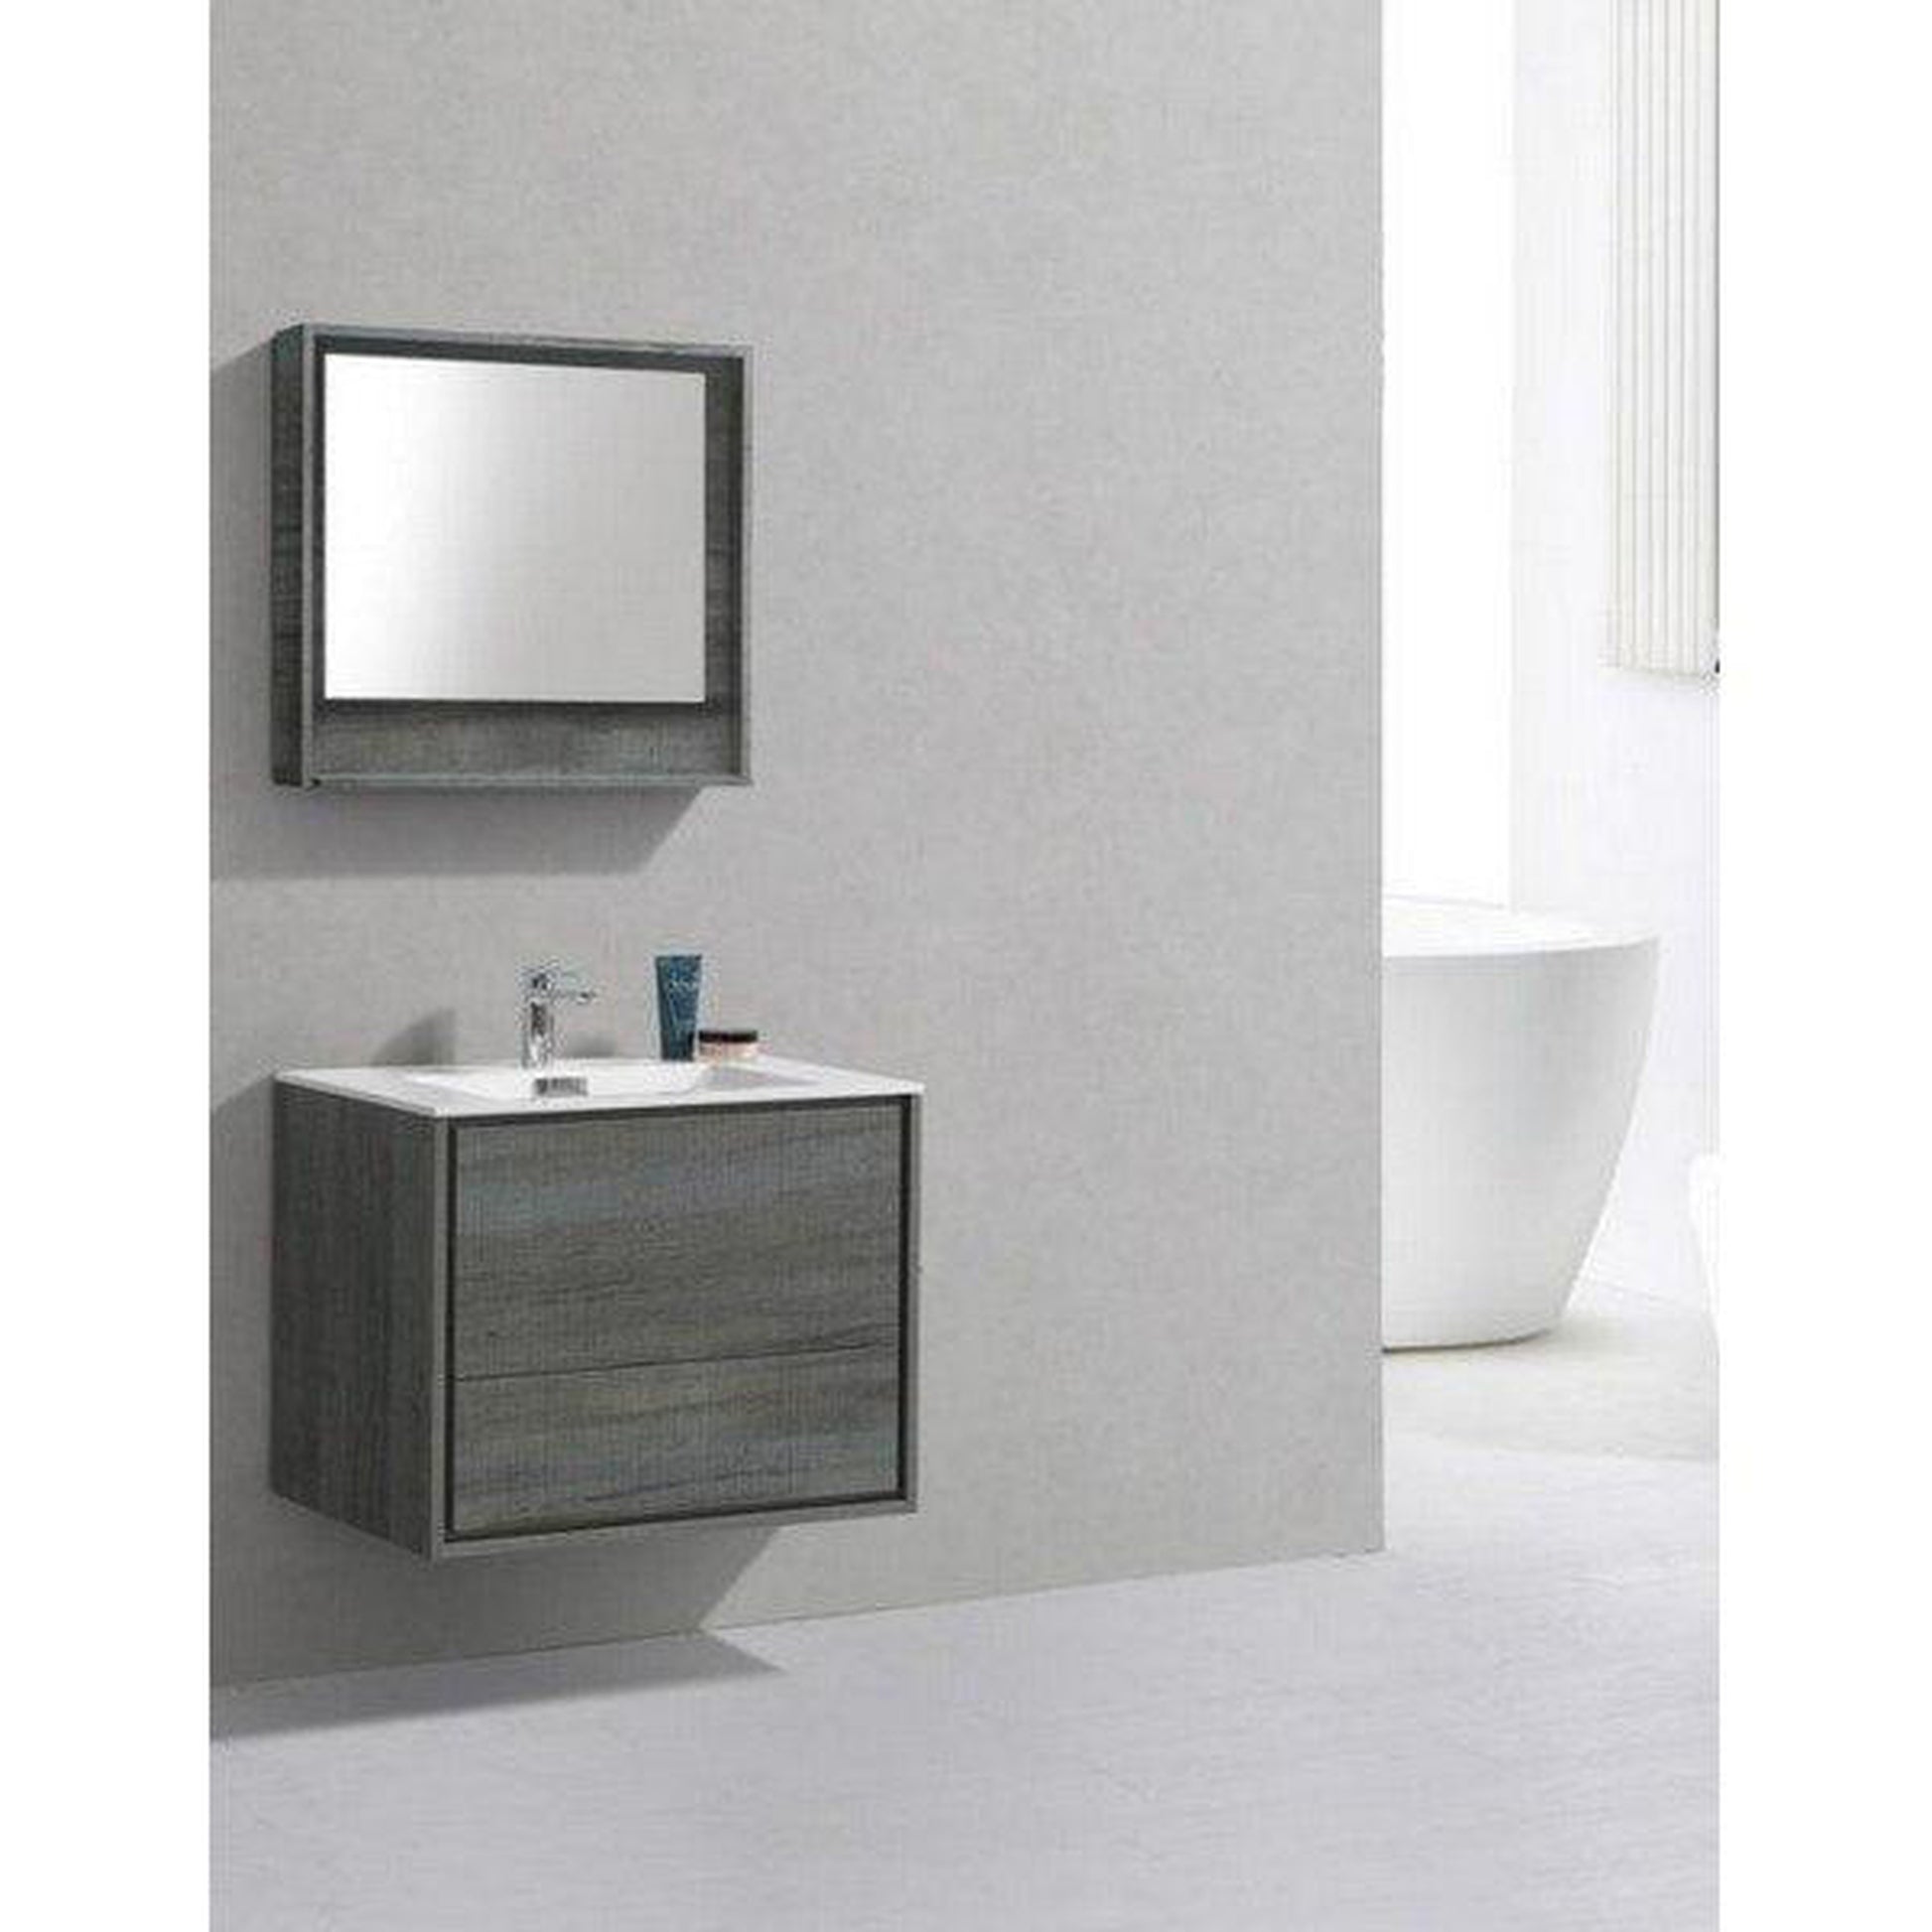 KubeBath DeLusso 30" Ocean Gray Wall-Mounted Modern Bathroom Vanity With Single Integrated Acrylic Sink With Overflow and 30" White Framed Mirror With Shelf